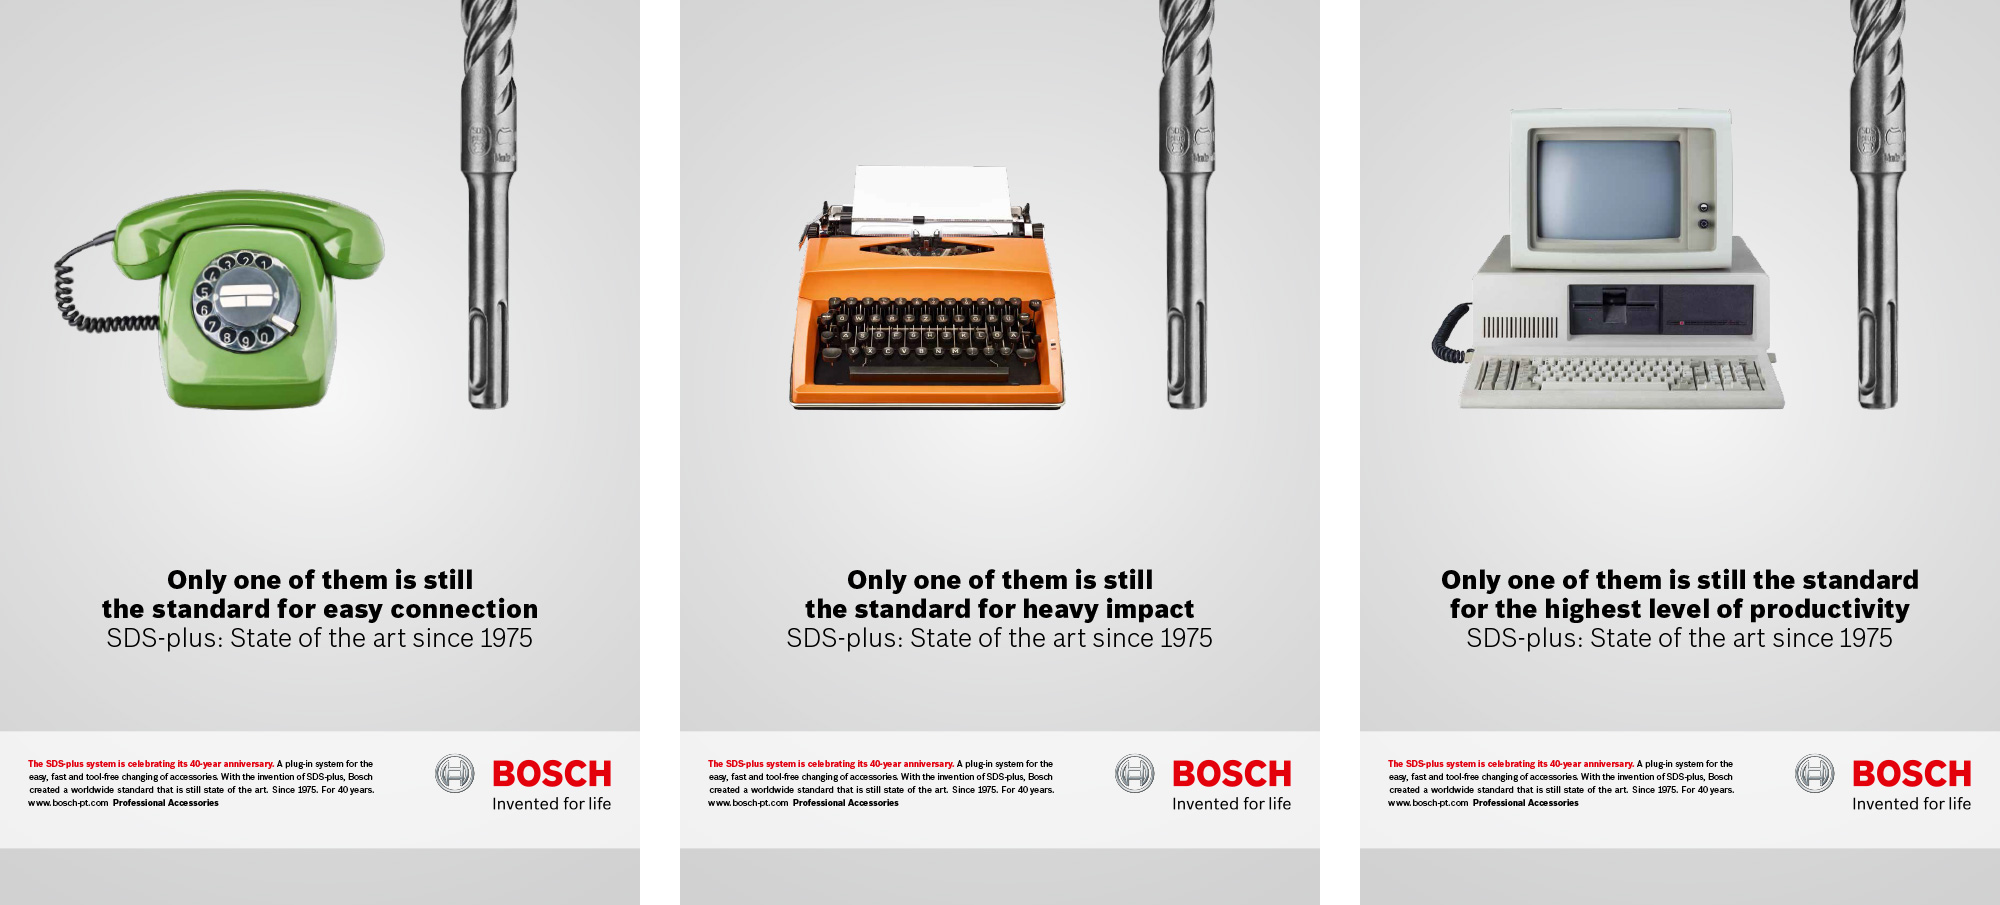 bosch campaign posters